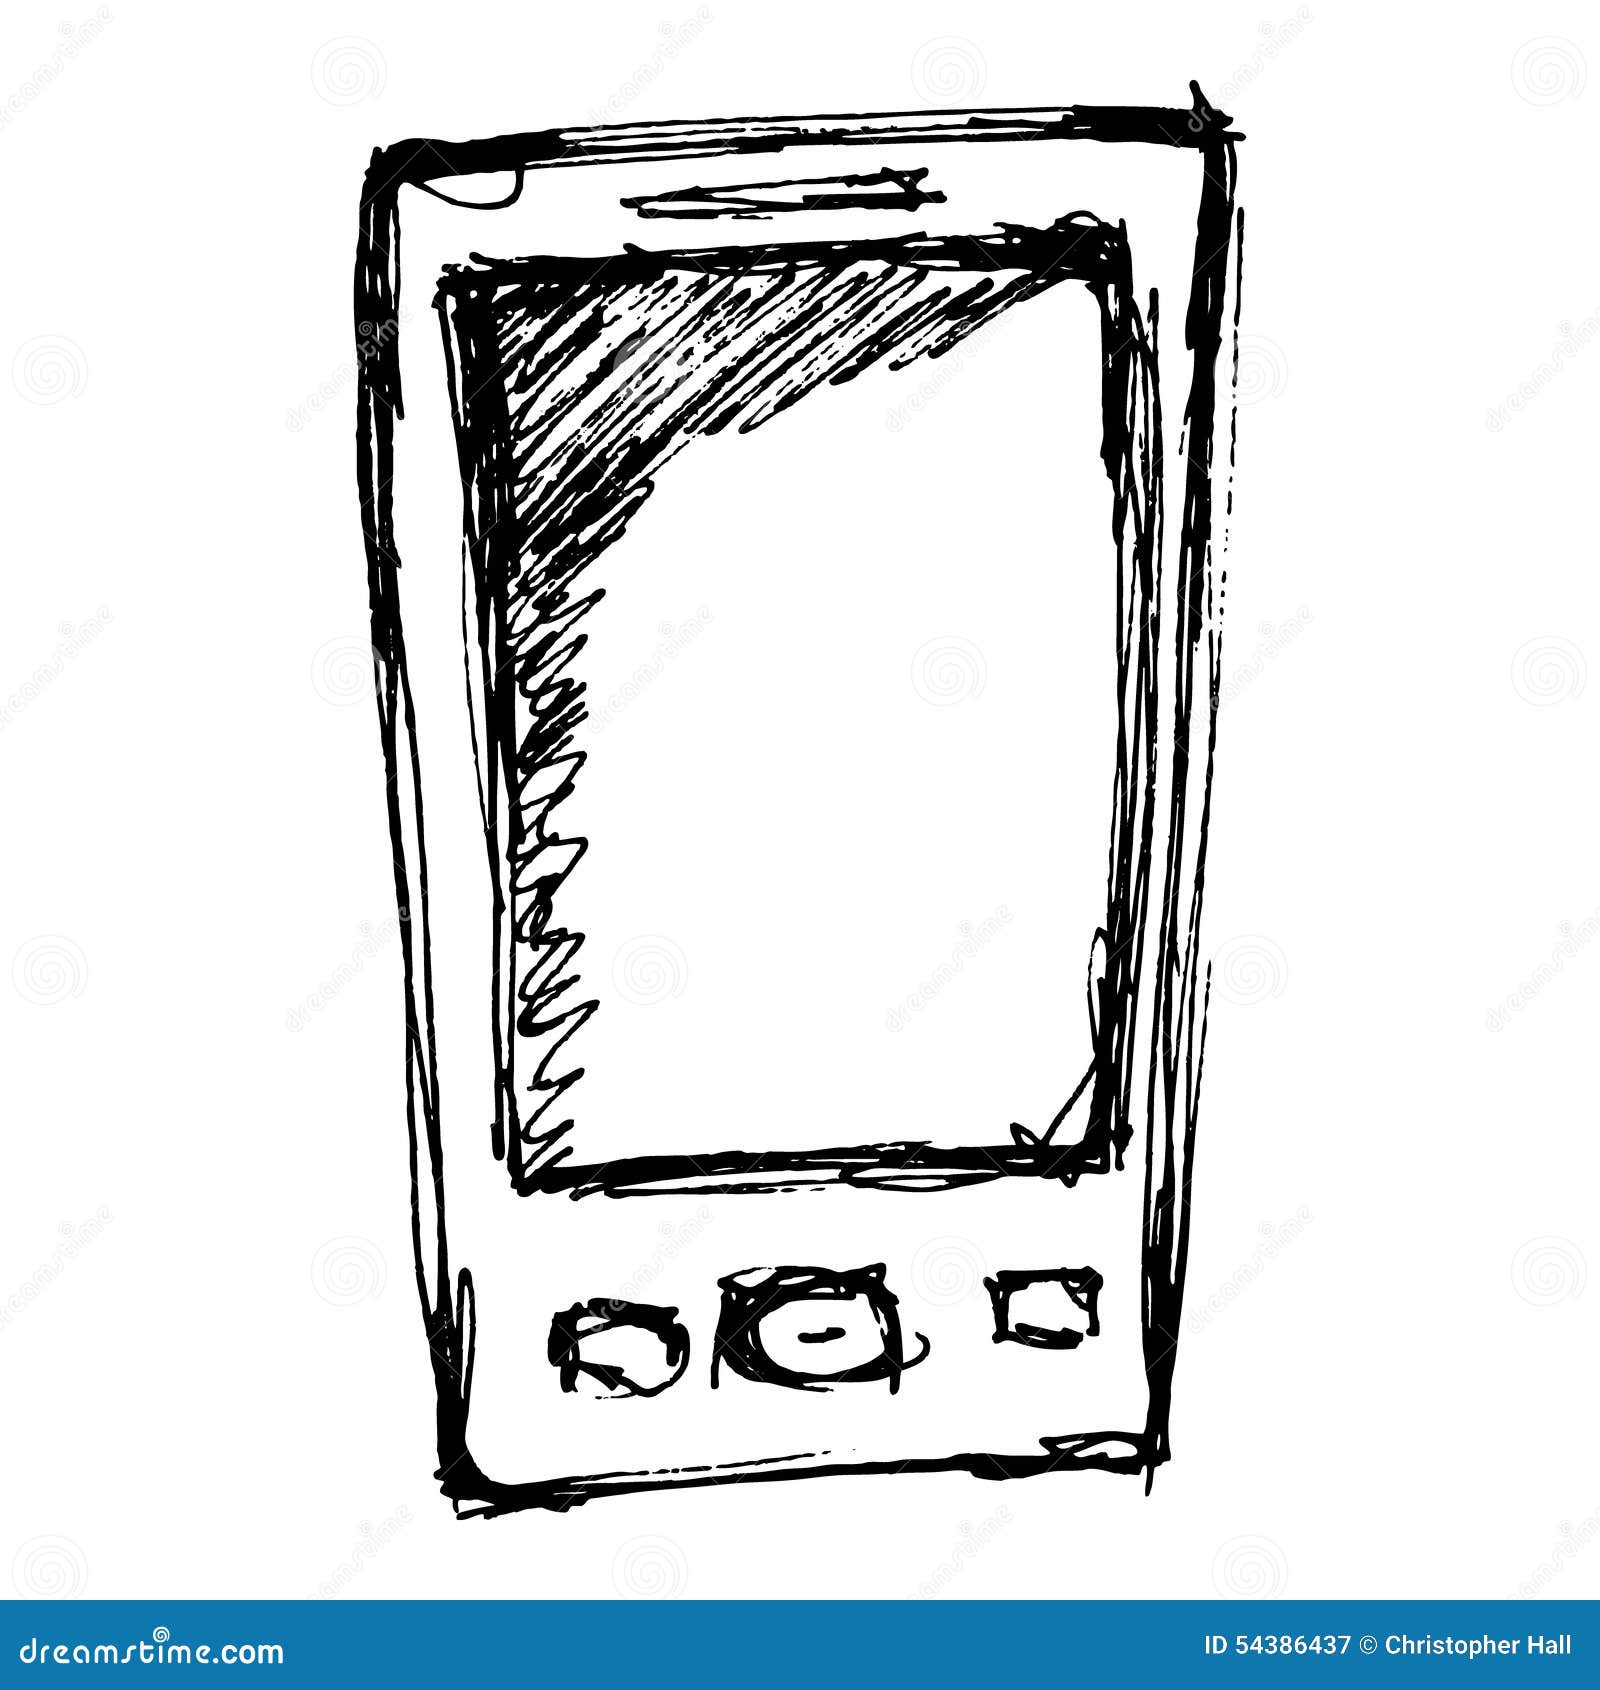 Top Cellphone Sketch Stock Vectors, Illustrations & Clip Art - iStock | Cellphone  drawing